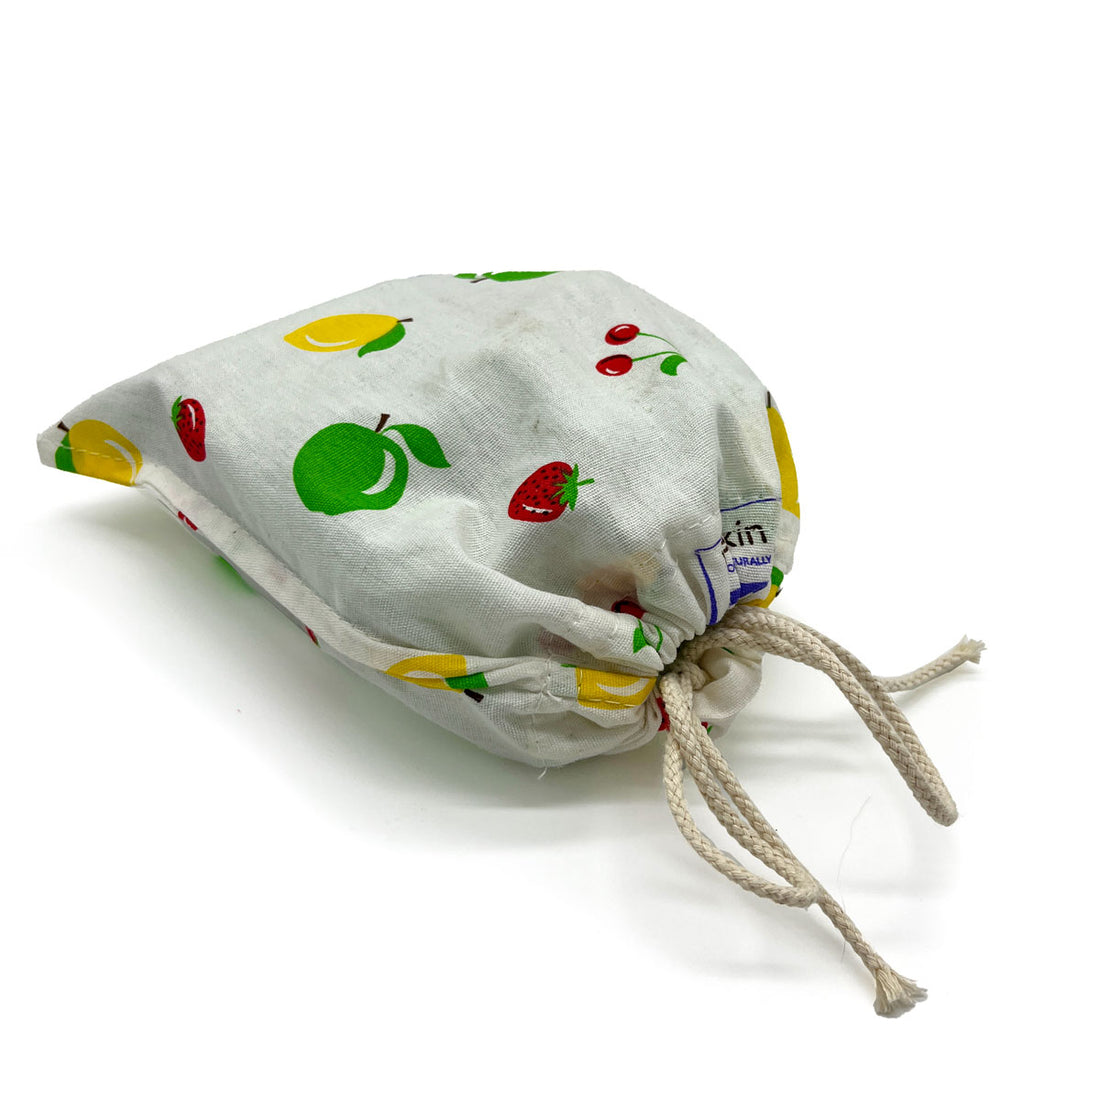 fabric bag fruit design closed with a twine